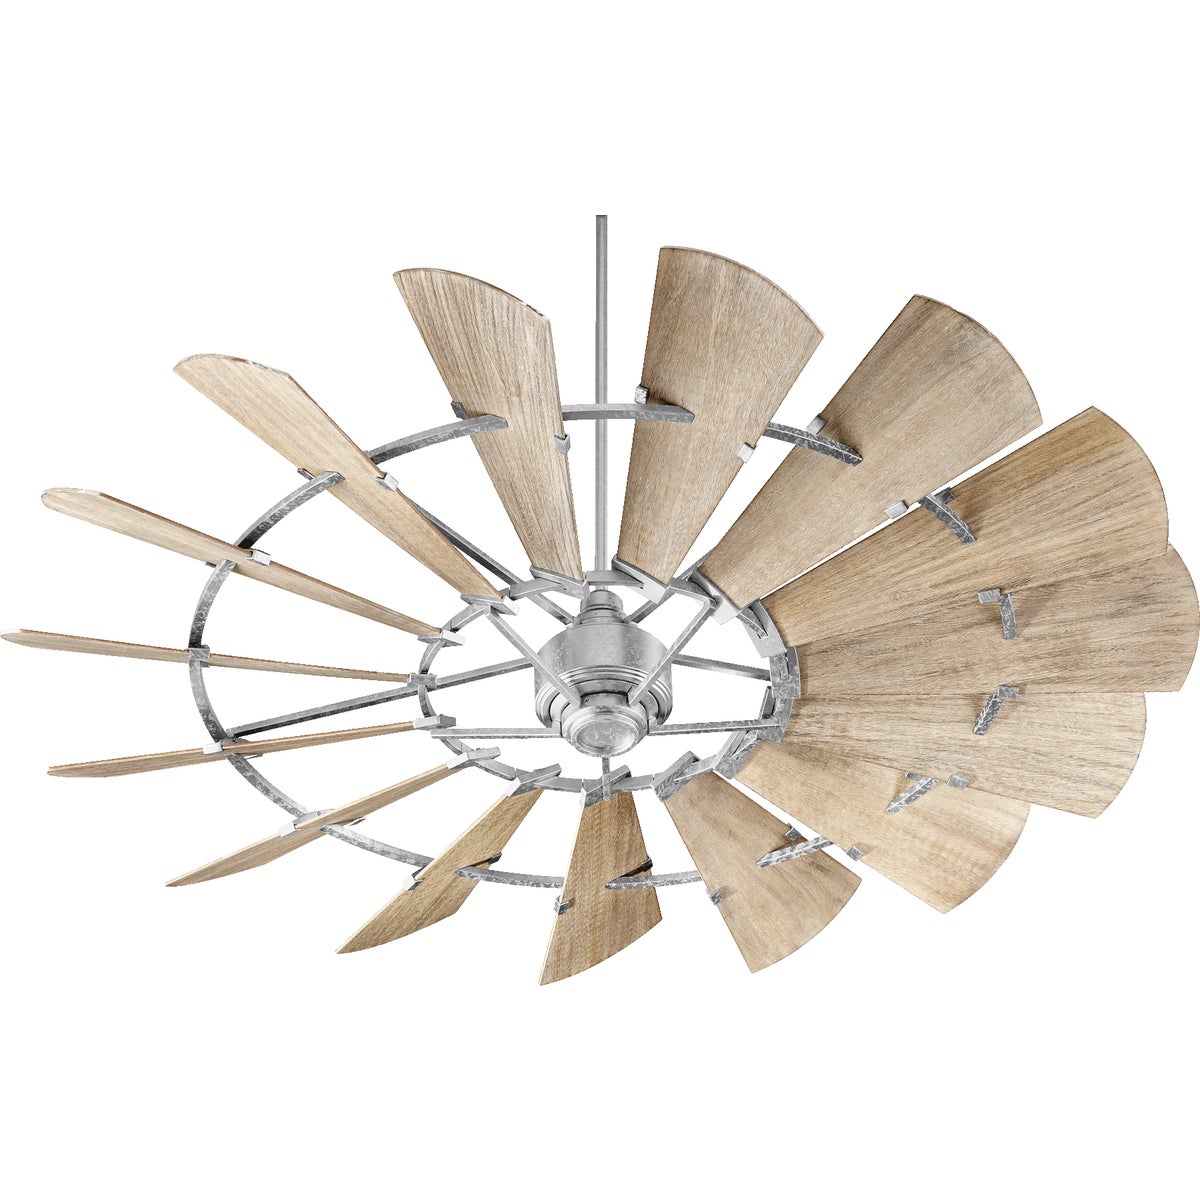 Farmhouse Ceiling Fan with 15 weathered oak wooden blades, embracing the rustic design of an outdoor windmill. Dimensions: 16.5"H x 72"W.